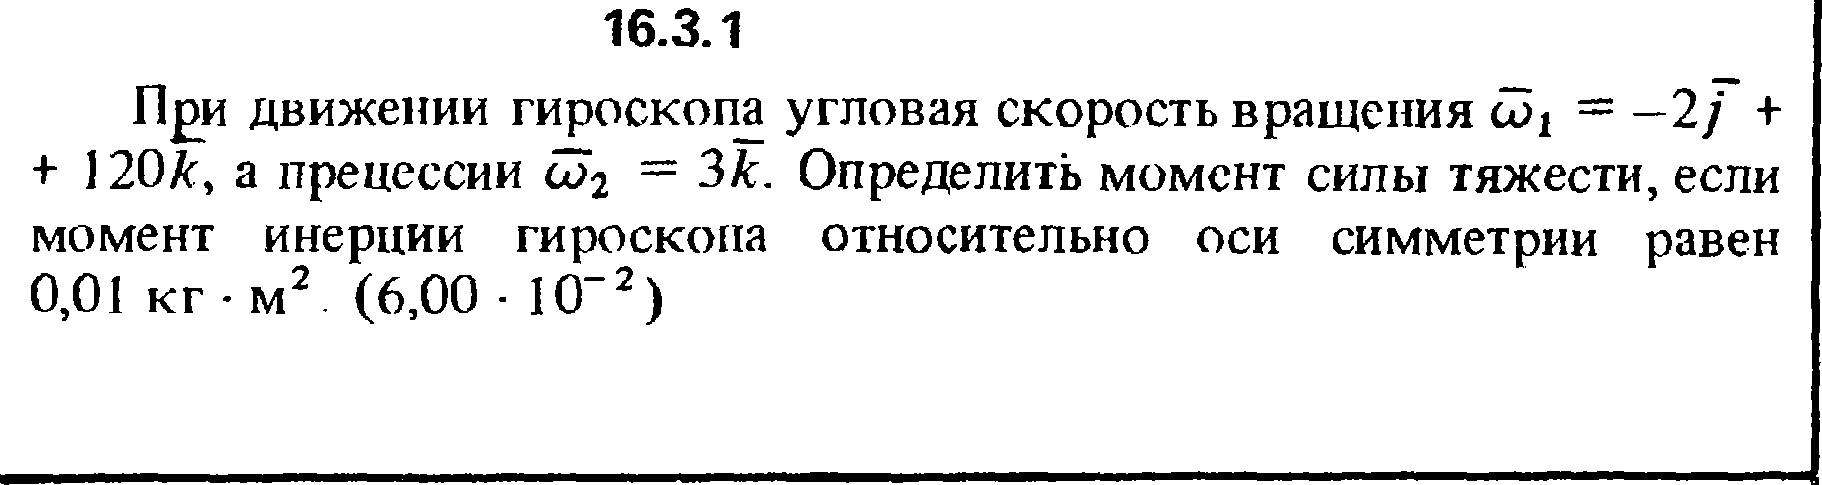 Solution 16.3.1 collection of Kep OE 1989